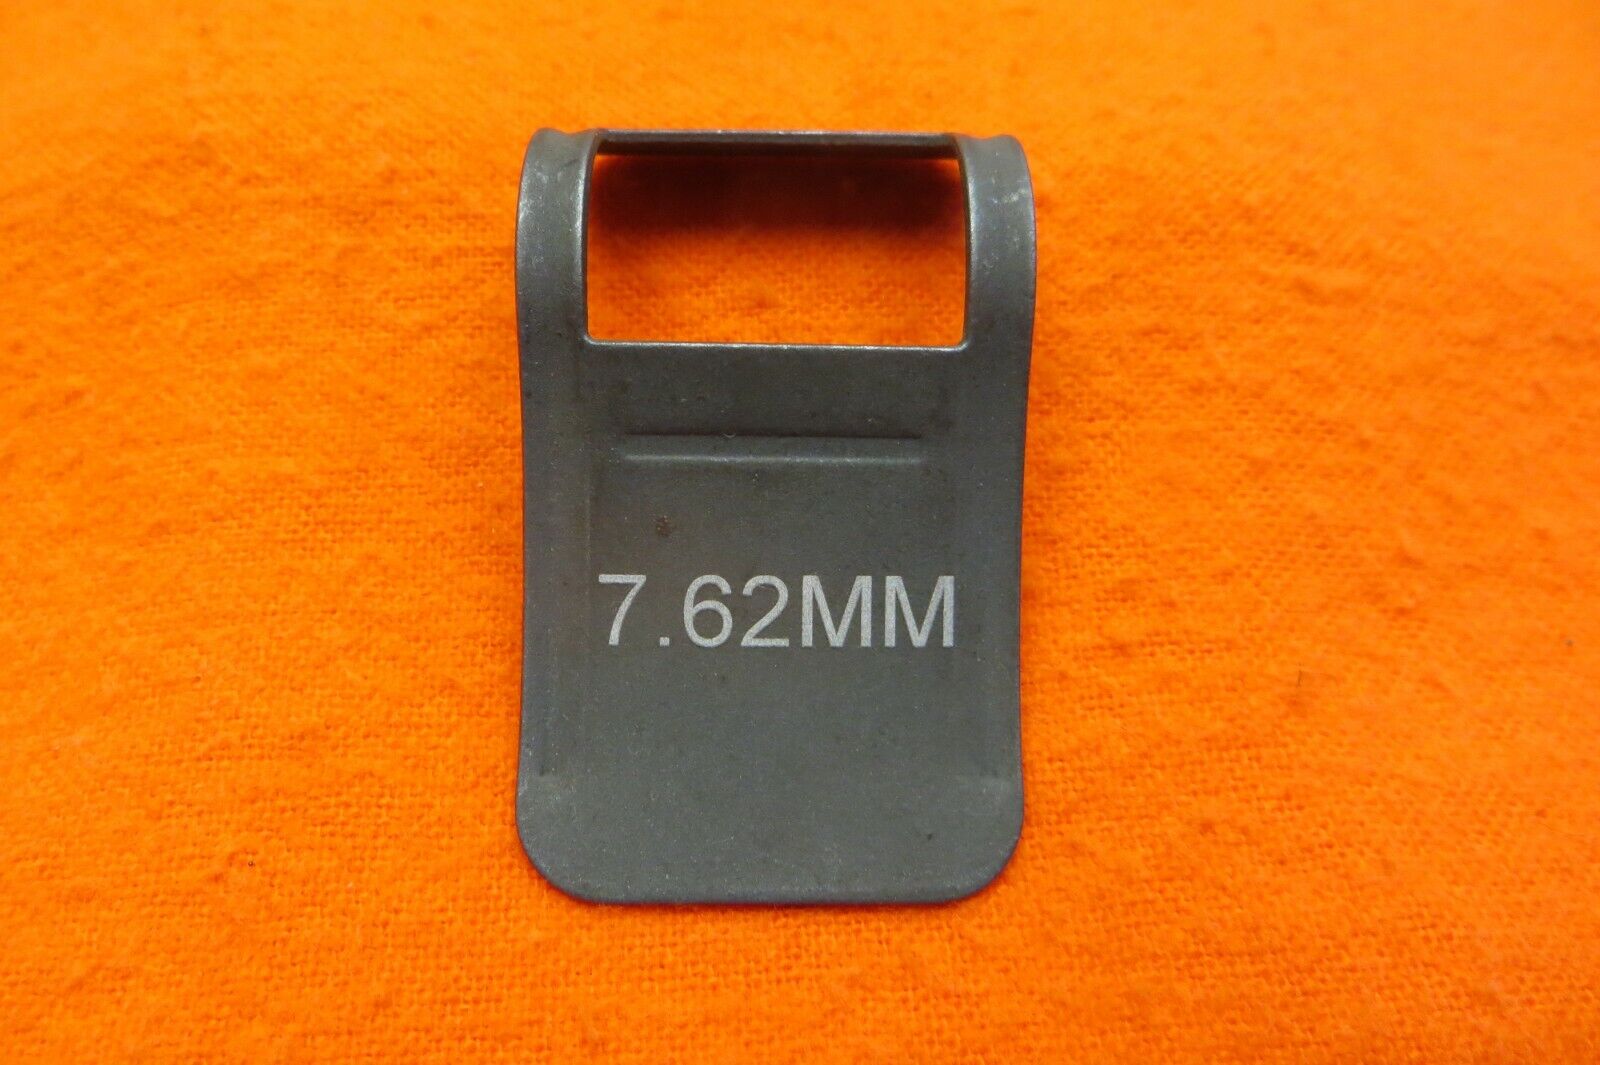 M1 Rifle, Rear Sight Cover - Marked 7.62mm   (4374)